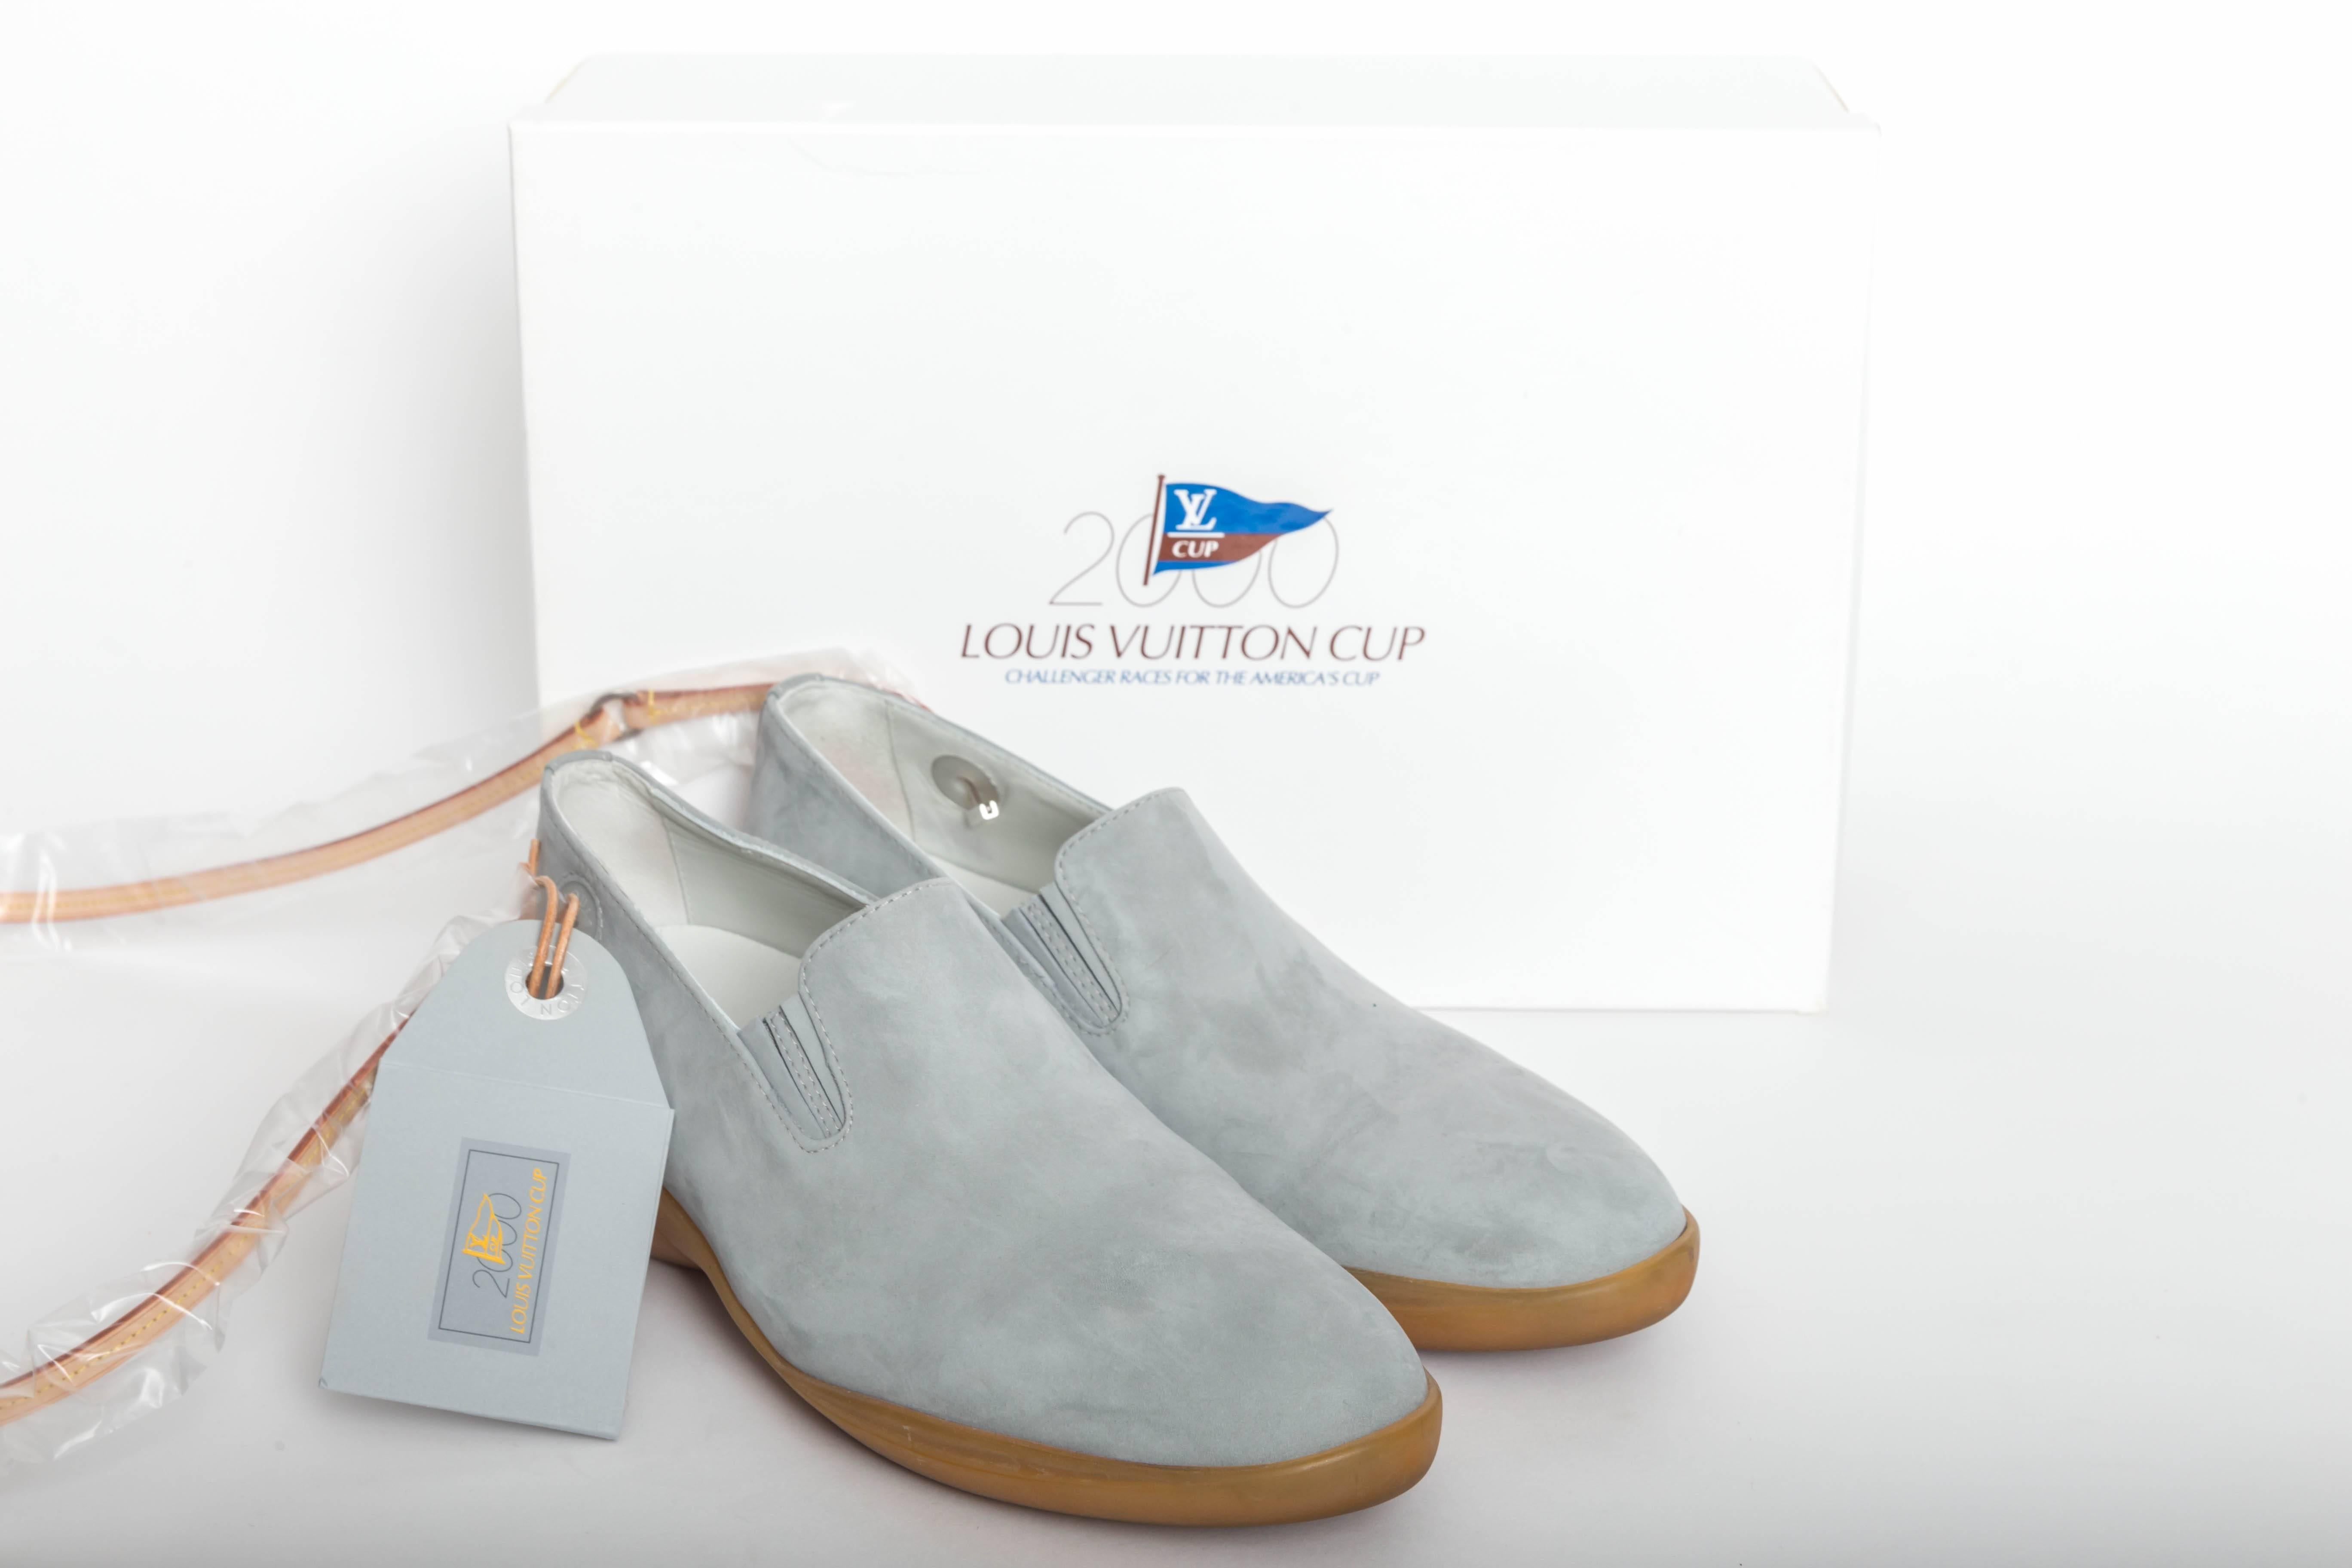  Incredibly Rare Vintage Louis Vuitton Blue Suede Boat Shoes / Loafers made for the America's Cup held in the year 2000.
Original Box is included.
Insole reads Louis Vuitton Cup.
Shoes have a small plastic hole embossed with Louis Vuitton designed